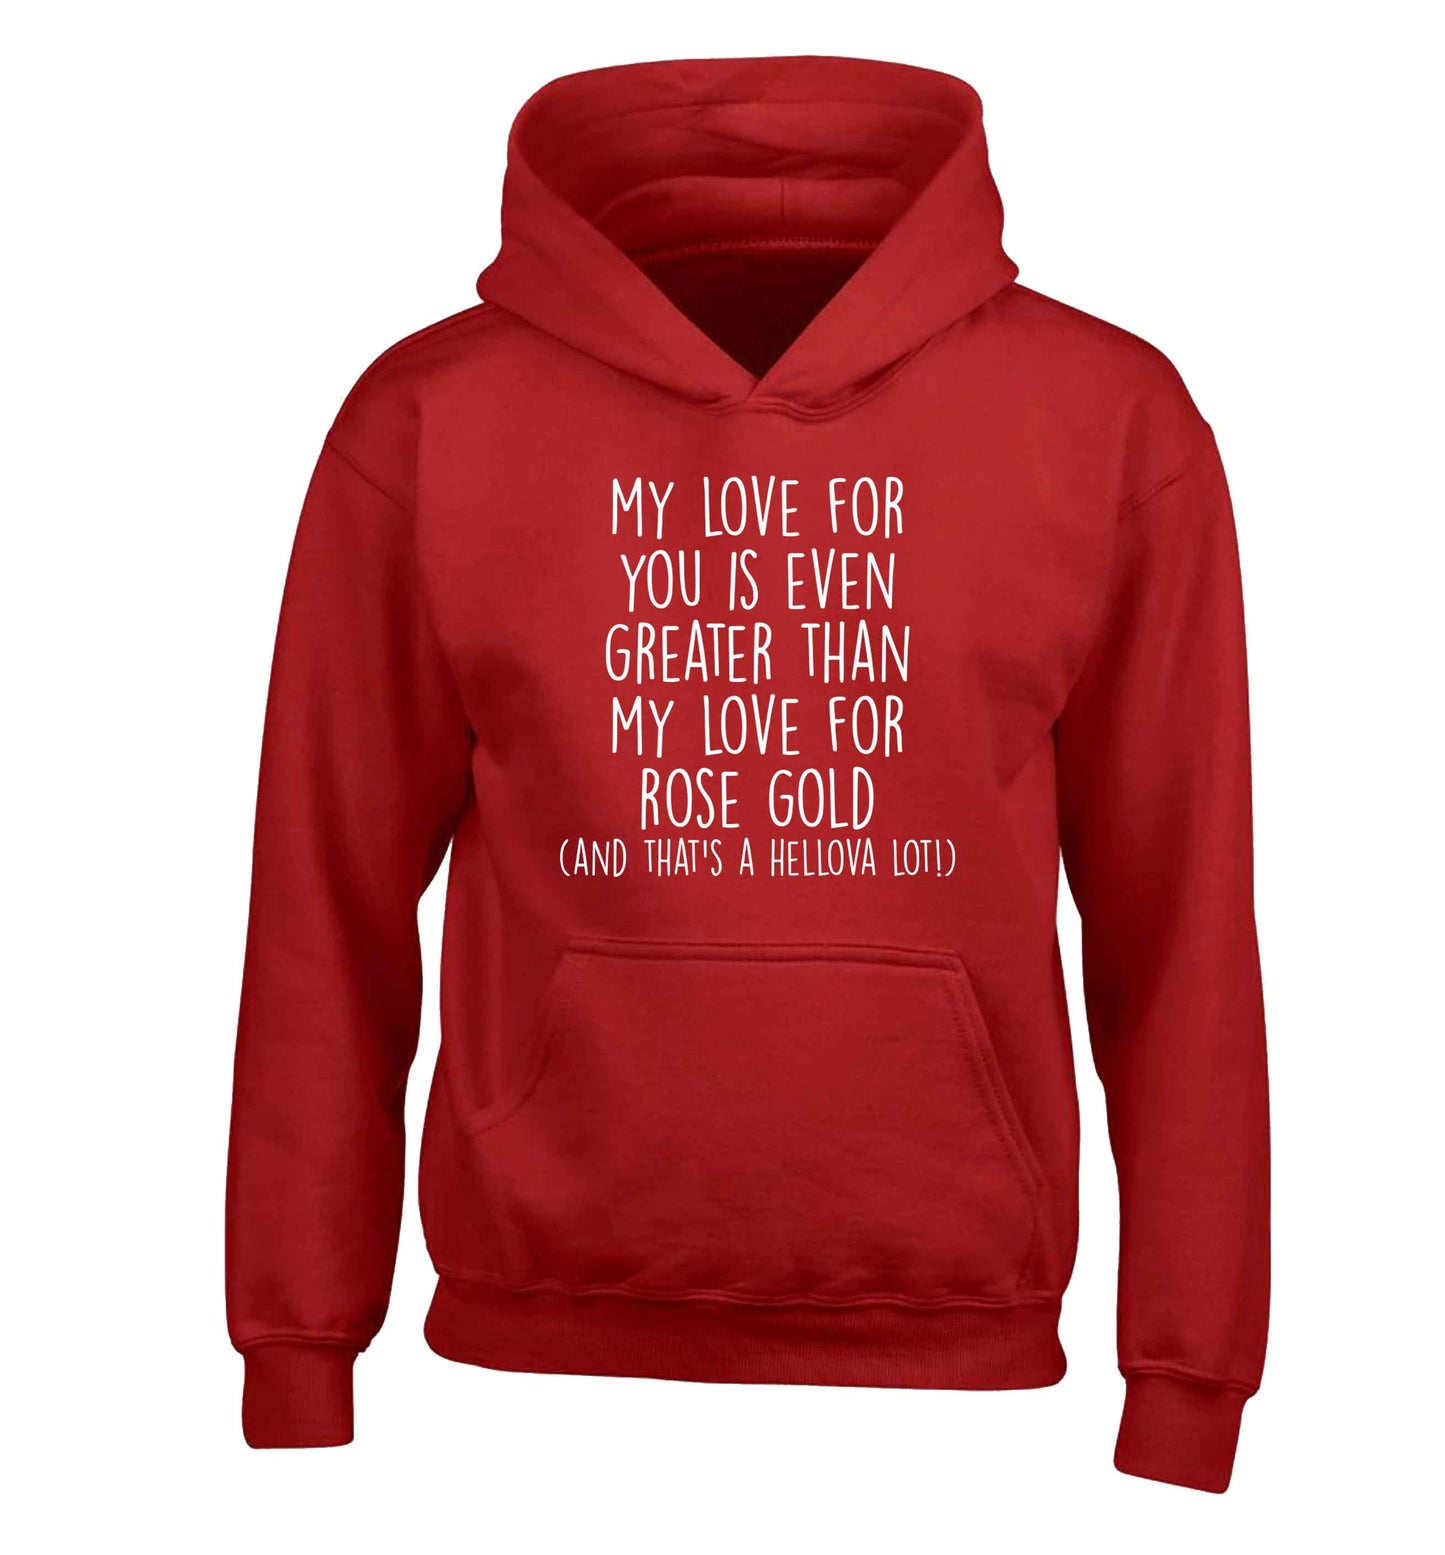 My love for you is even greater than my love for rose gold (and that's a hellova lot) children's red hoodie 12-13 Years